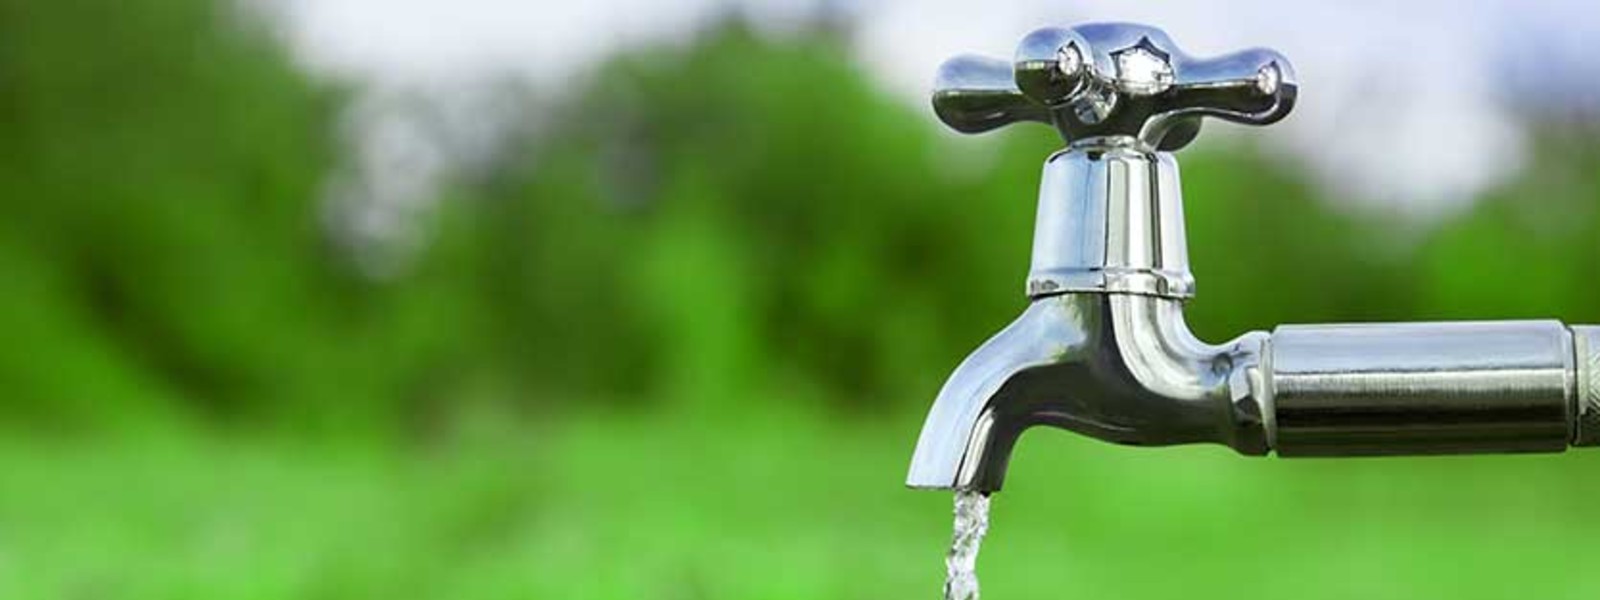 Rs. 7.5 Bn in unpaid water bills from consumers